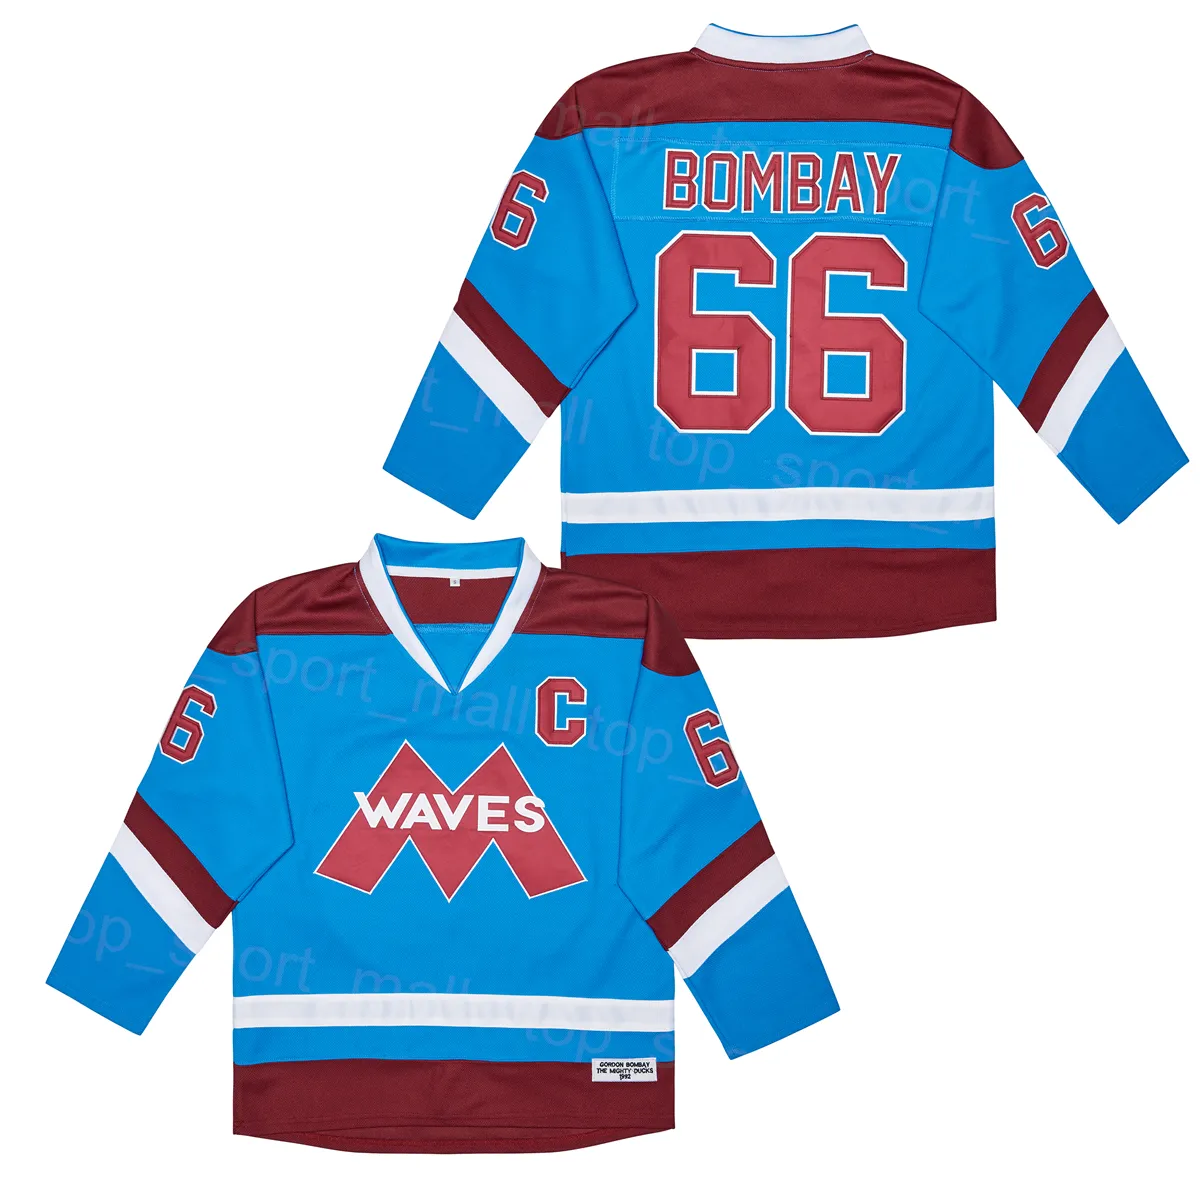 Movie Hockey 66 Gordon Bombay Jersey Gunner Stahl Mighty Waves College Team Color Blue Vintage Brodery for Sport Fans Breattable Pullover University Mens